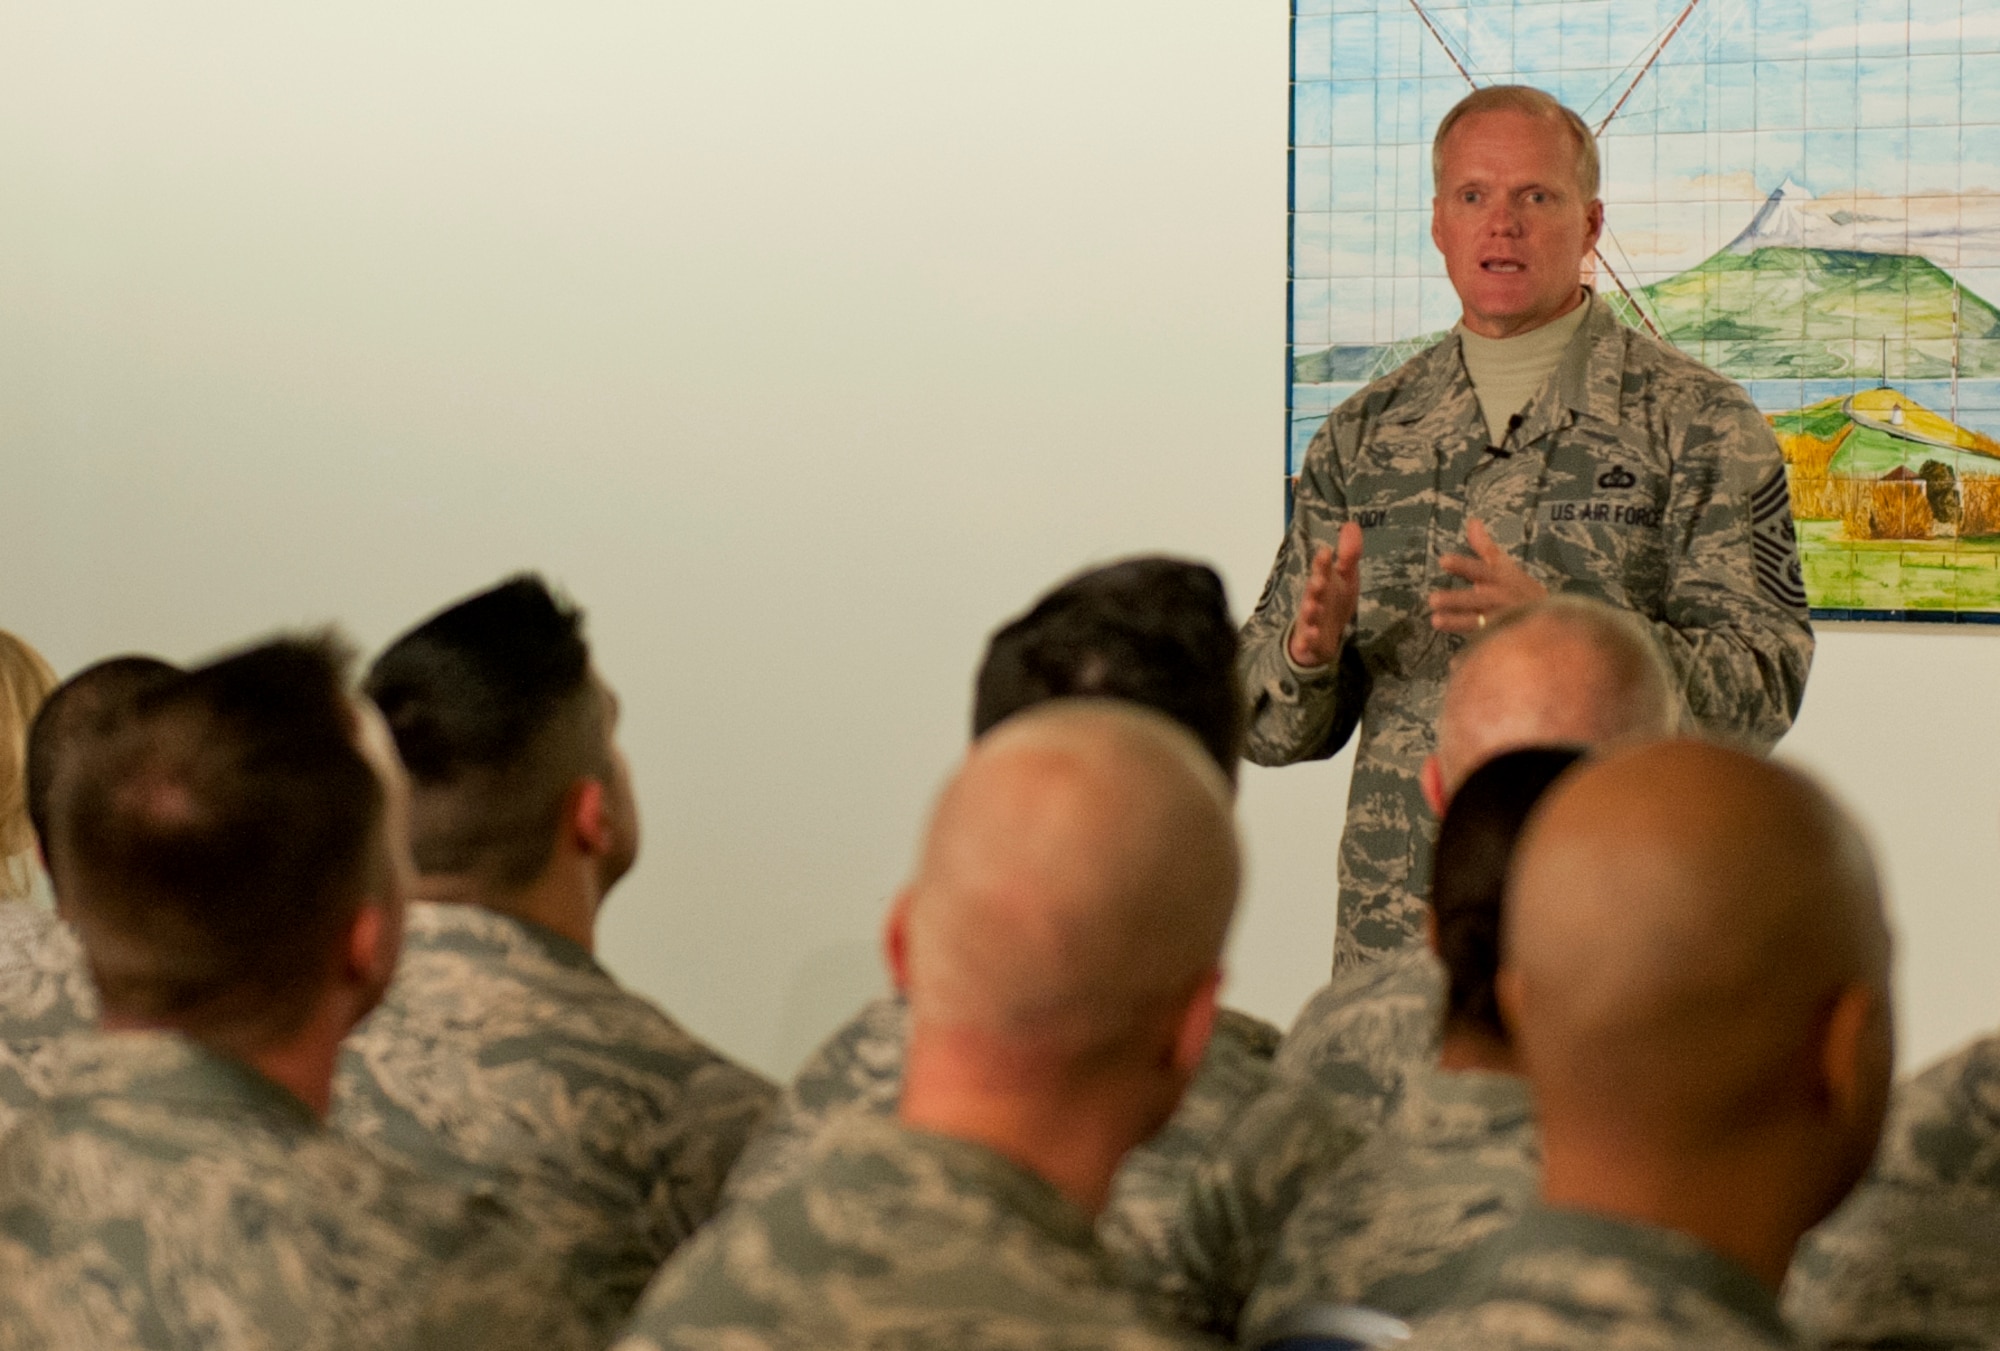 Chief Master Sgt. of the Air Force James A. Cody speaks to Airmen during an all call Jan. 26, 2015 at the 65th Air Base Wing, Lajes Field, Azores, Portugal . Cody is currently on a tour of bases within the United States Air Forces in Europe command to express his gratitude to Airmen, listen to their concerns and answer their questions. (U.S. Air Force photo/Staff Sgt. Zachary Wolf)